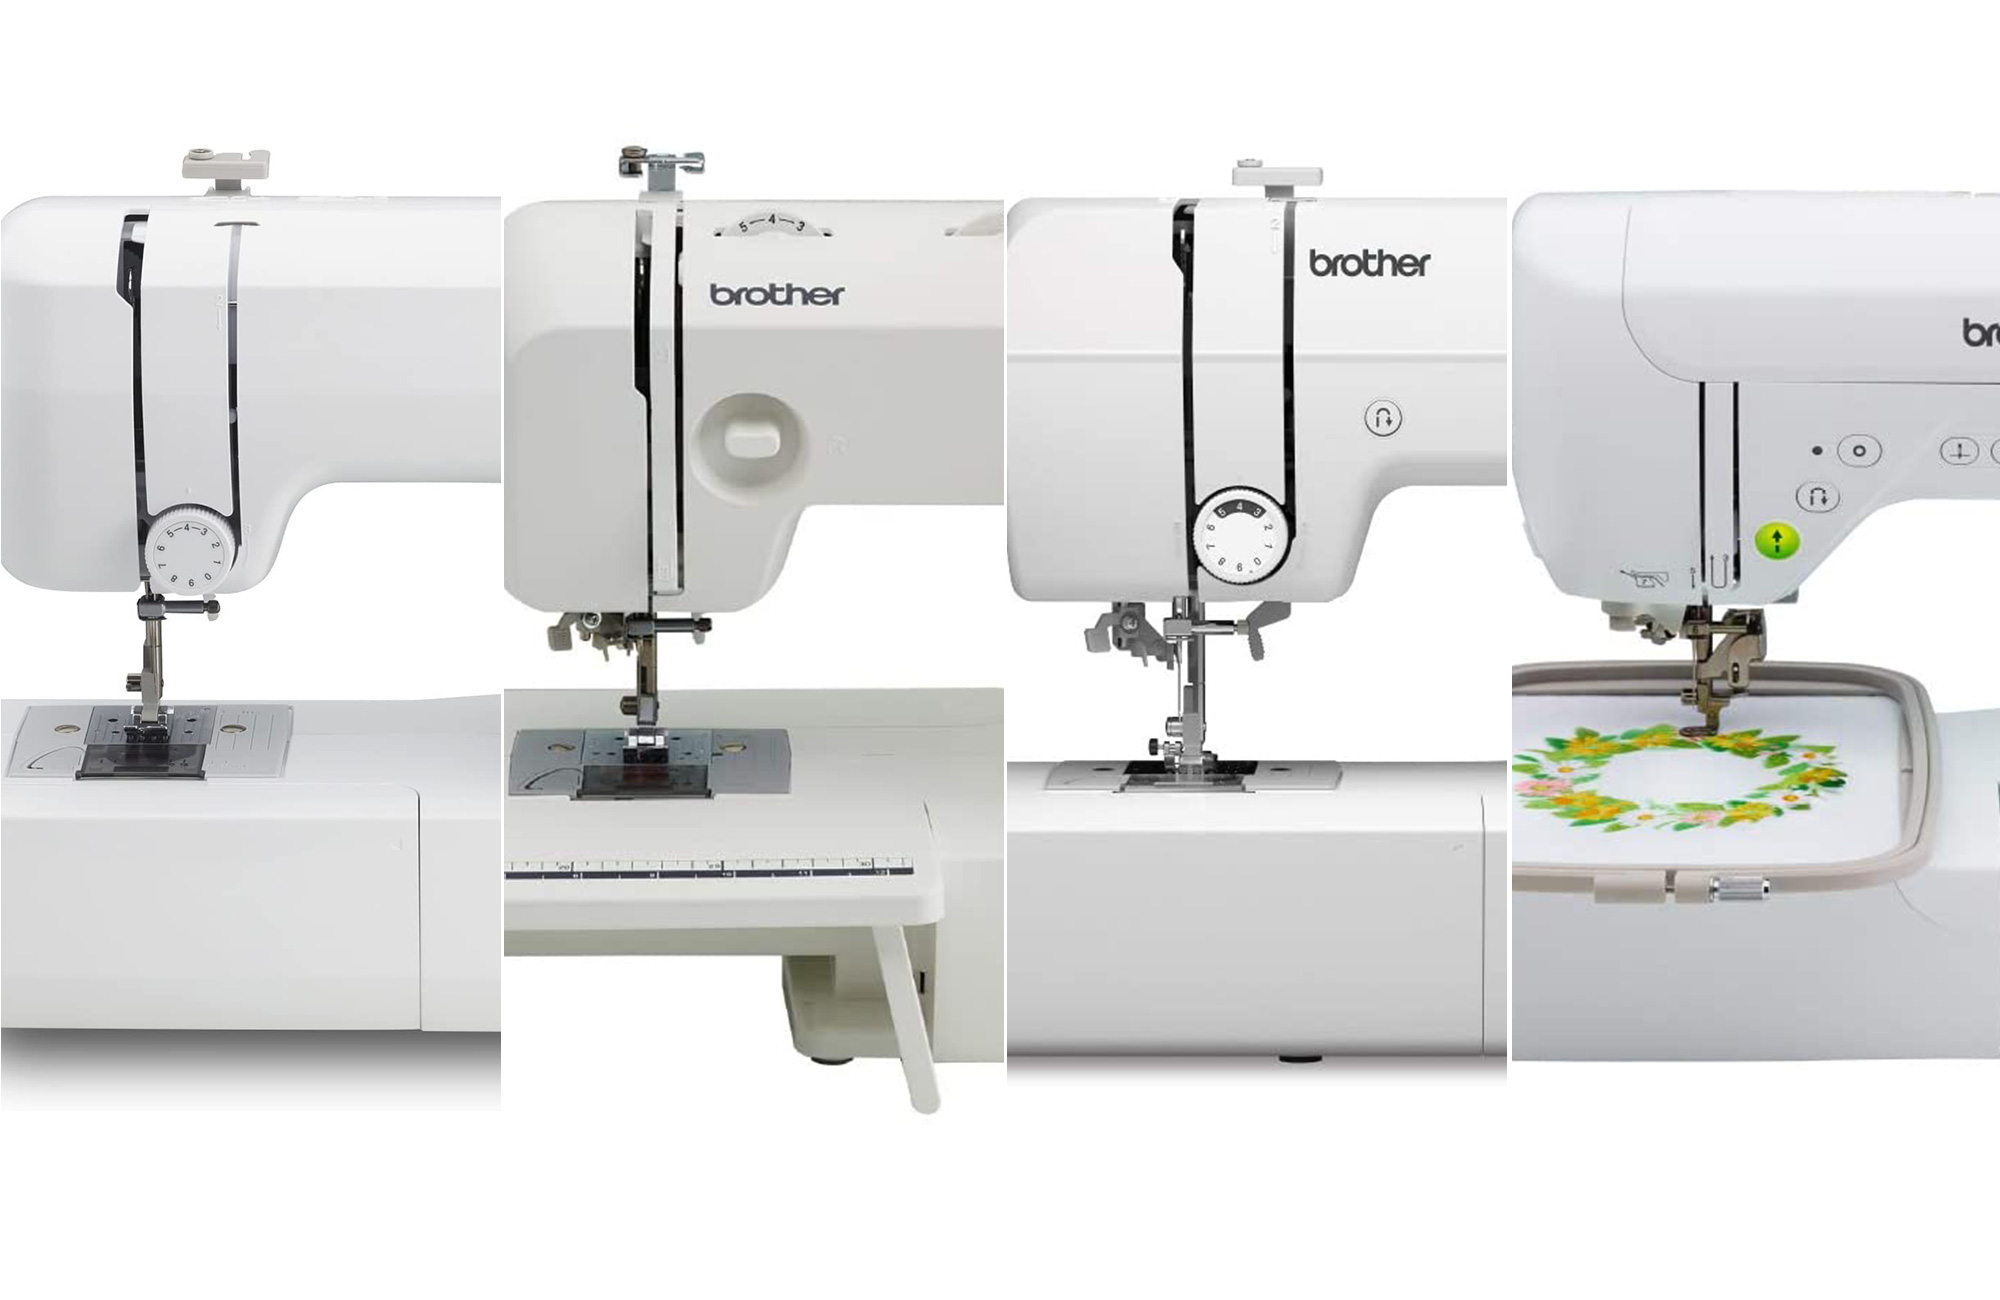 The 5 Best Lights for Sewing, Needlework and More